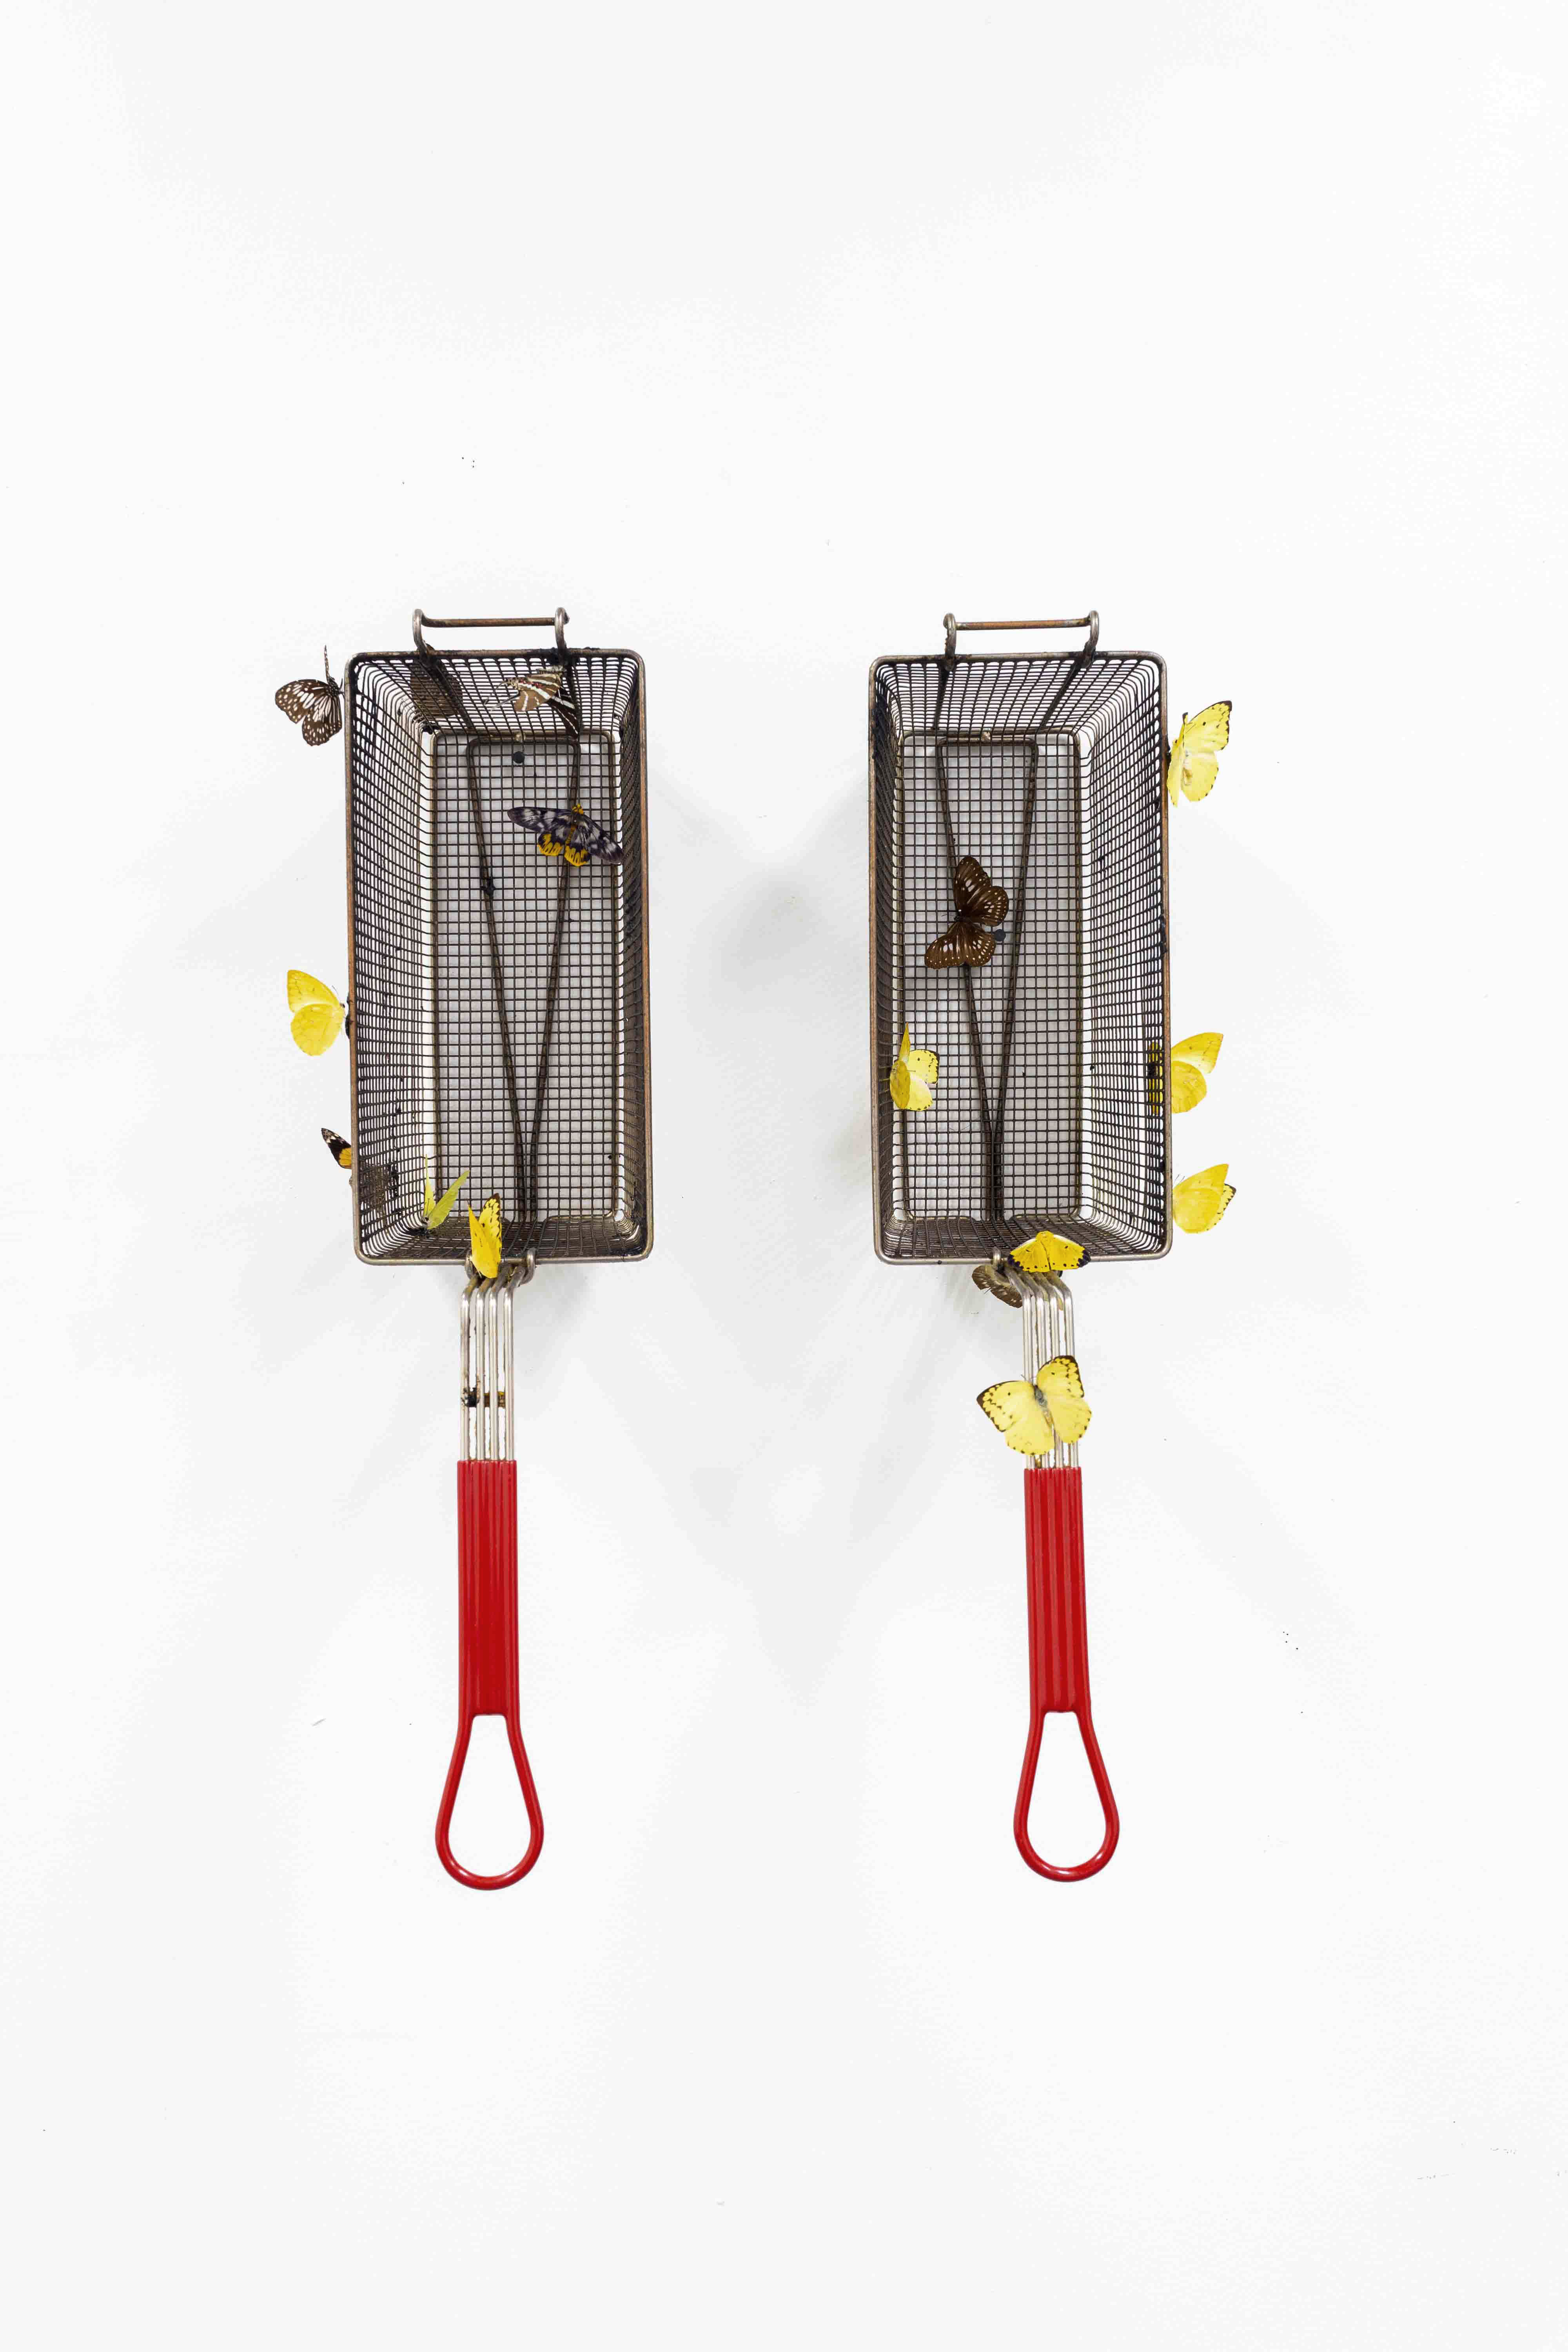 Any Meat on The Bone - A sculpture by Brian Dario, Featuring two fry baskets, with yellow and brown butterflies pinned to different parts of the fry baskets